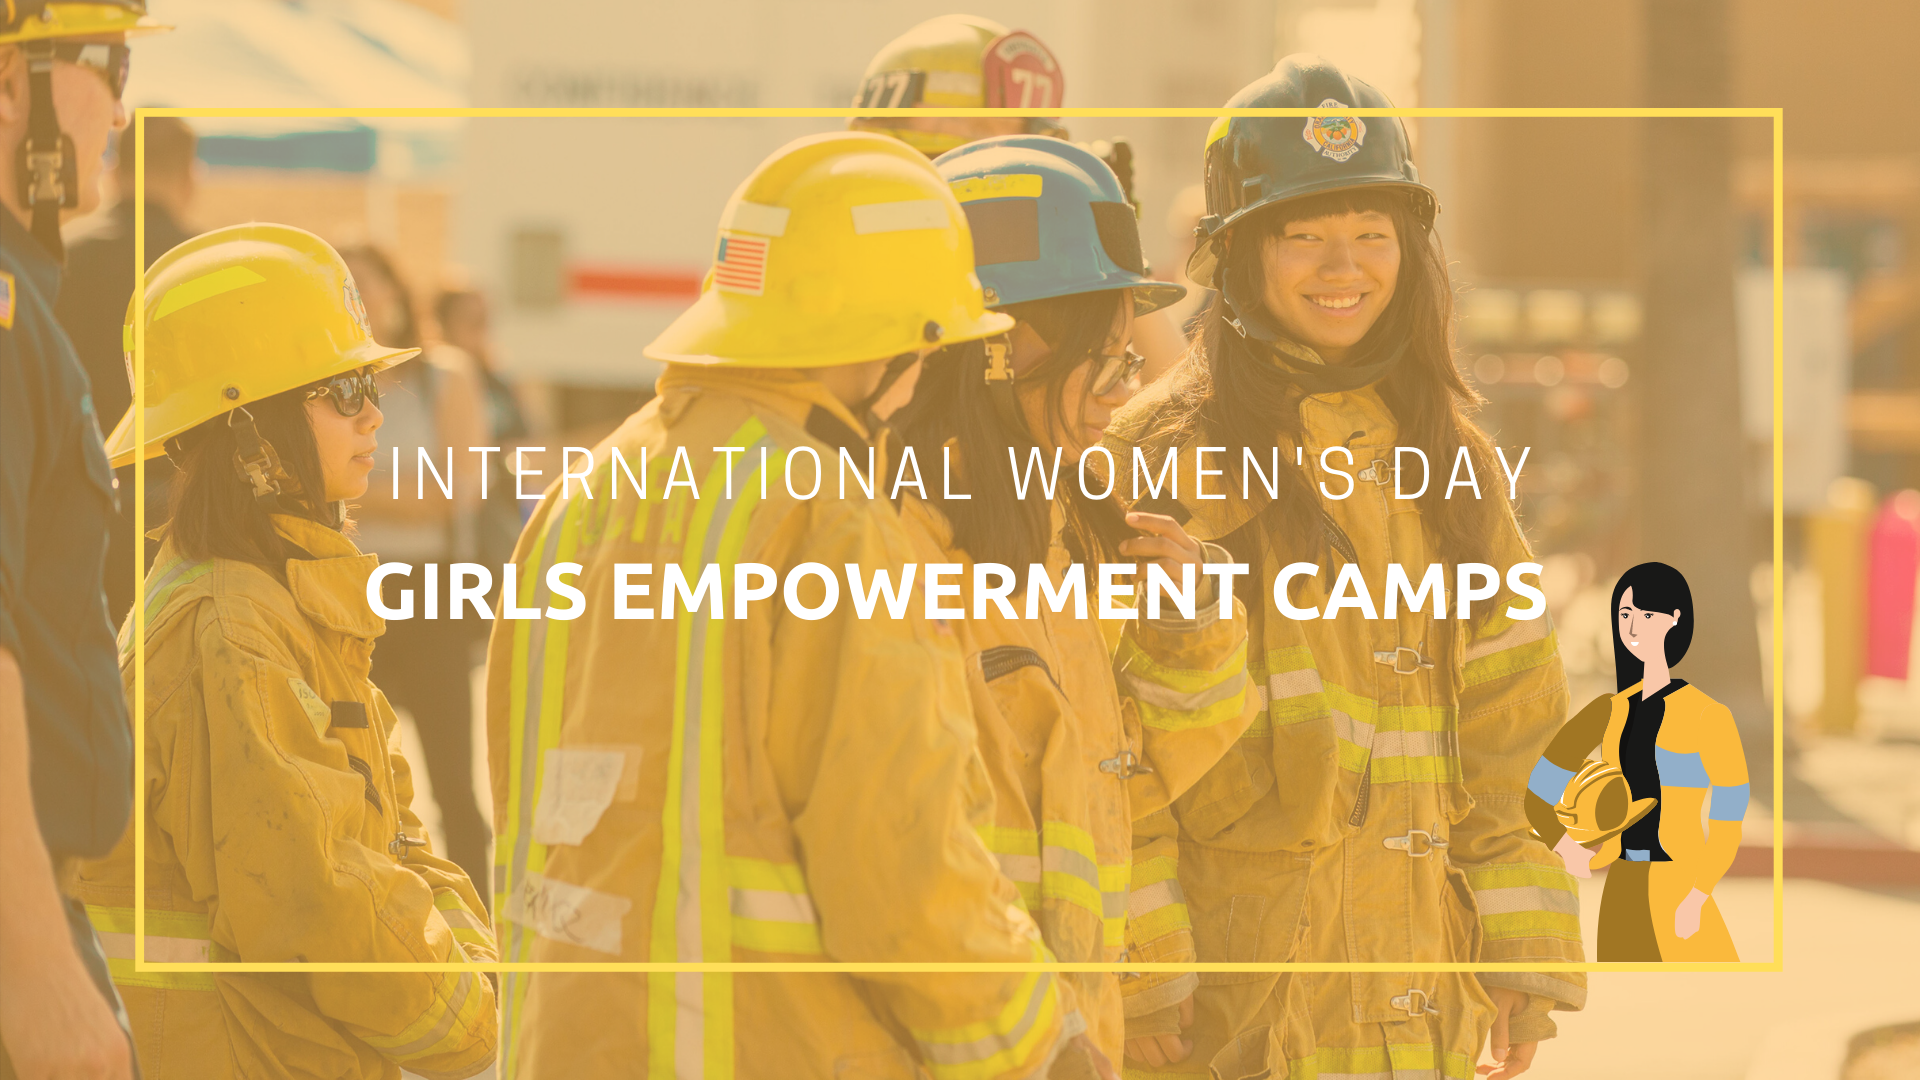 Celebrating International Women’s Day with Girls Empowerment Camps to Inspire the Next Generation of Women to Explore Careers in Fire Service